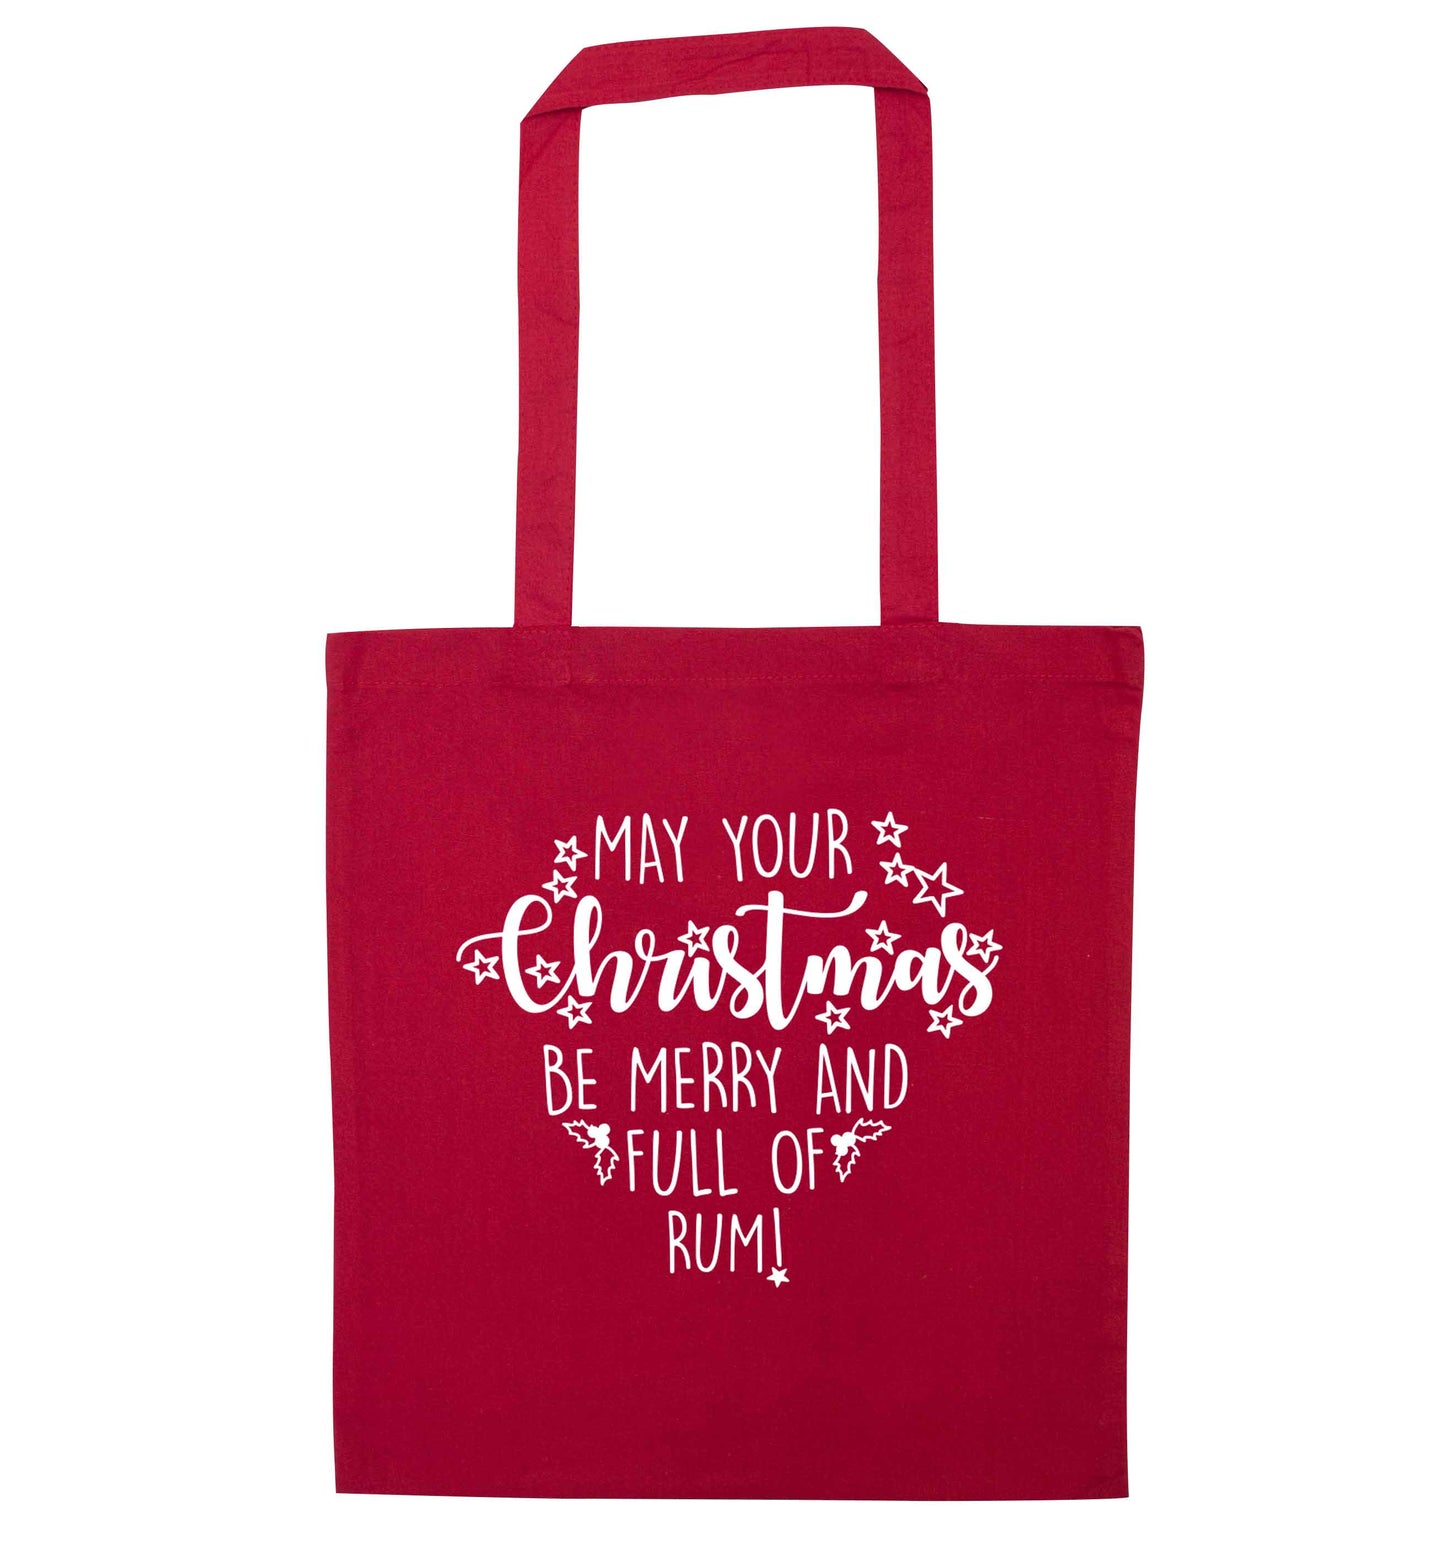 May your Christmas be merry and full of rum red tote bag